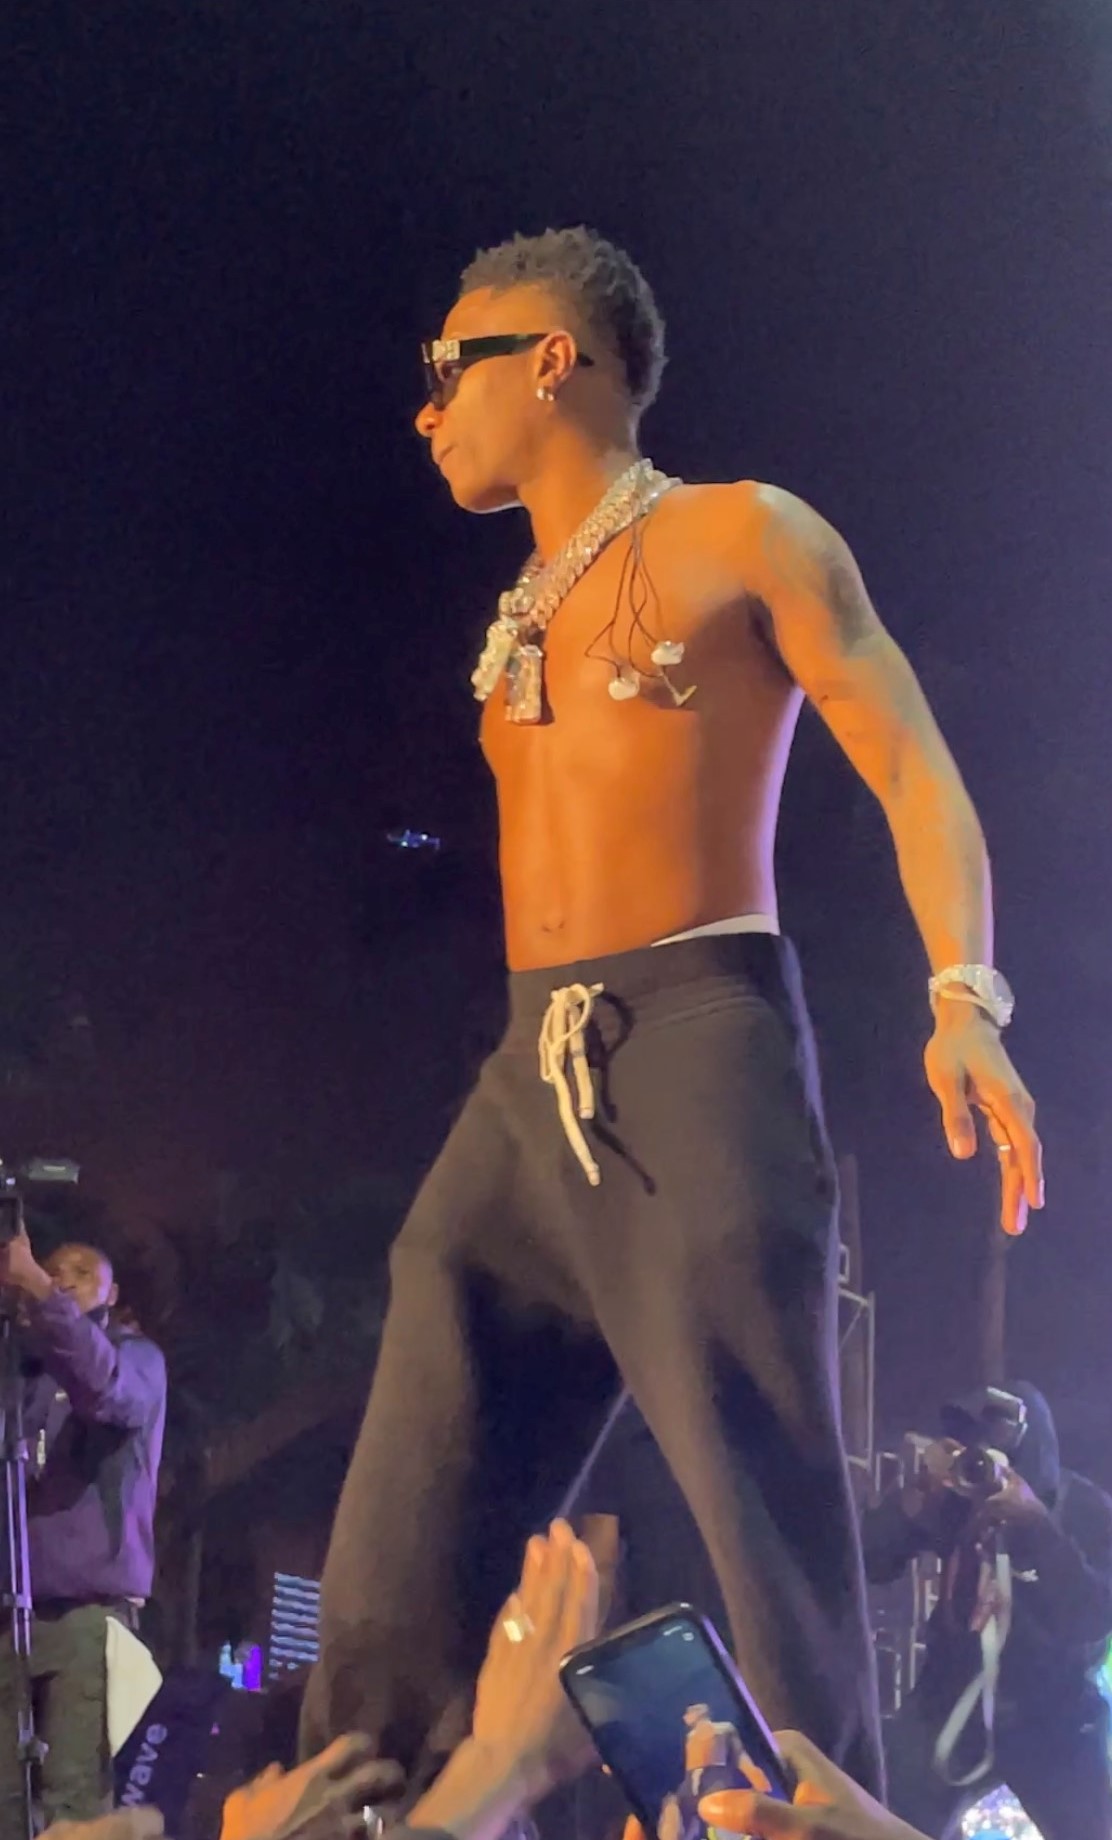 Wizkid Accused Of Showing Off His ‘Hard’ Manhood To Women On His Concert.